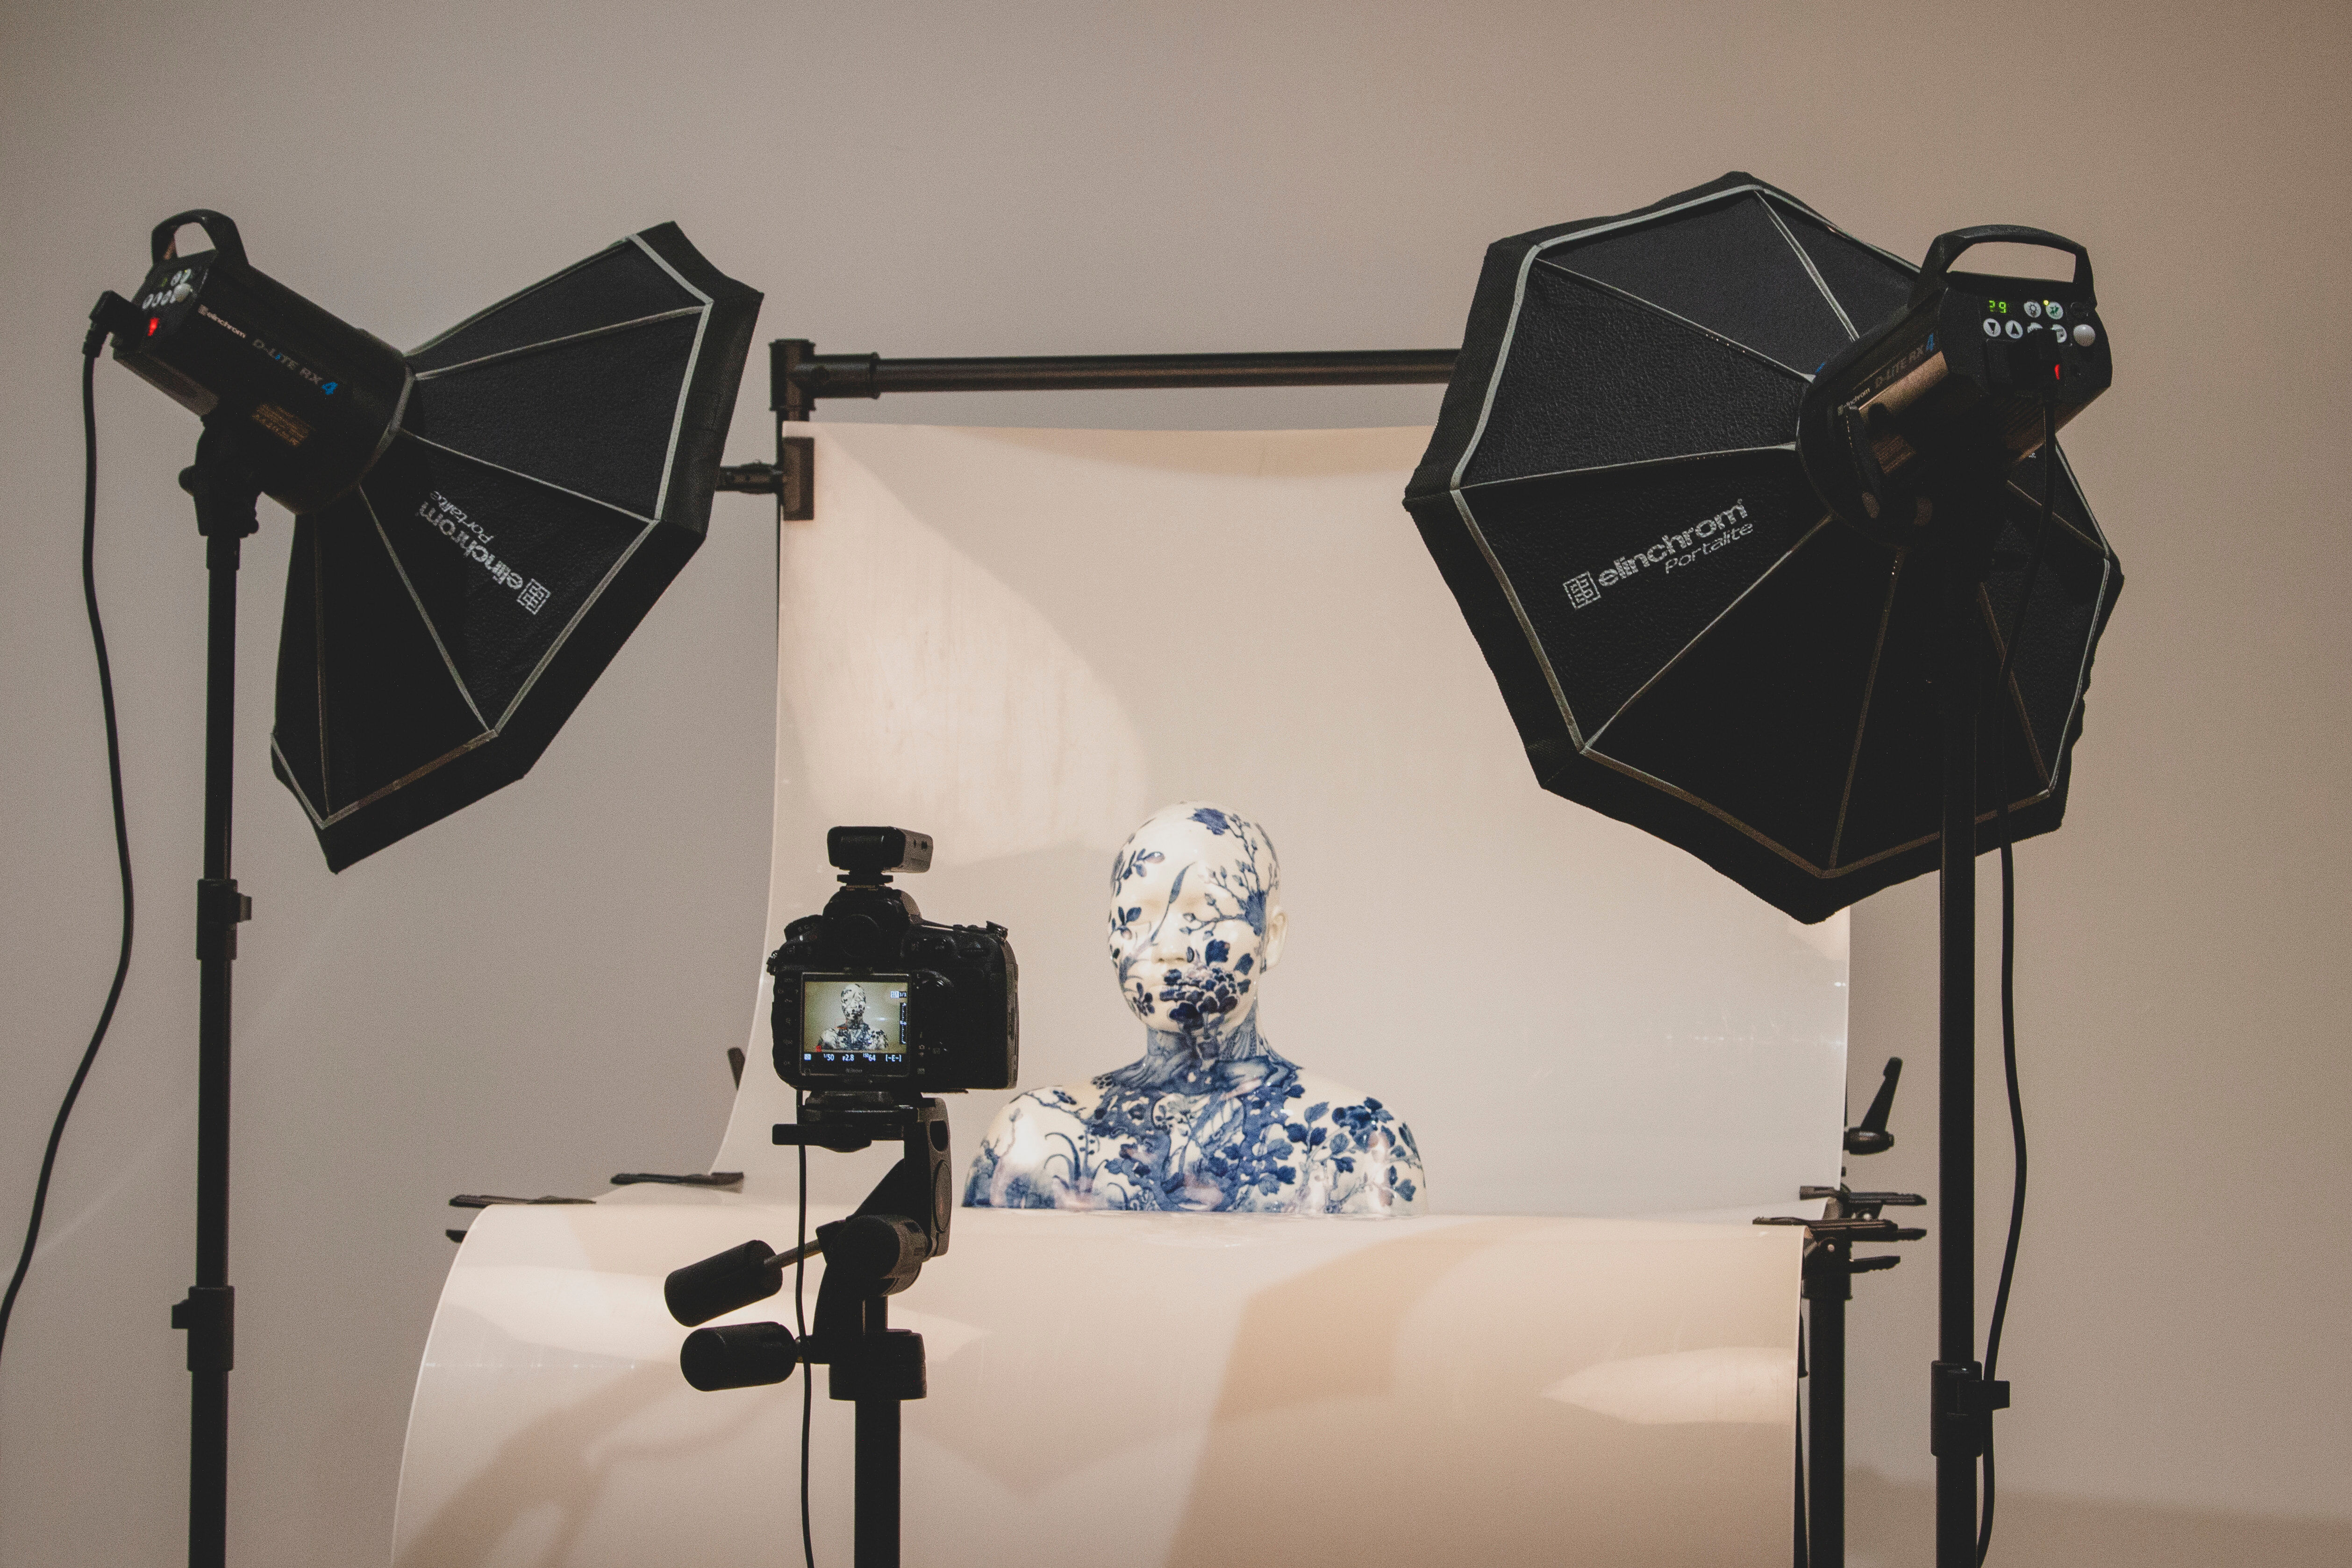 A white ceramic bust with blue floral design overall is sitting against a white photography backdrop, in the foreground is a camera with the bust visible in the viewfinder. Two large black studio lights stand on either side of the ceramic bust.